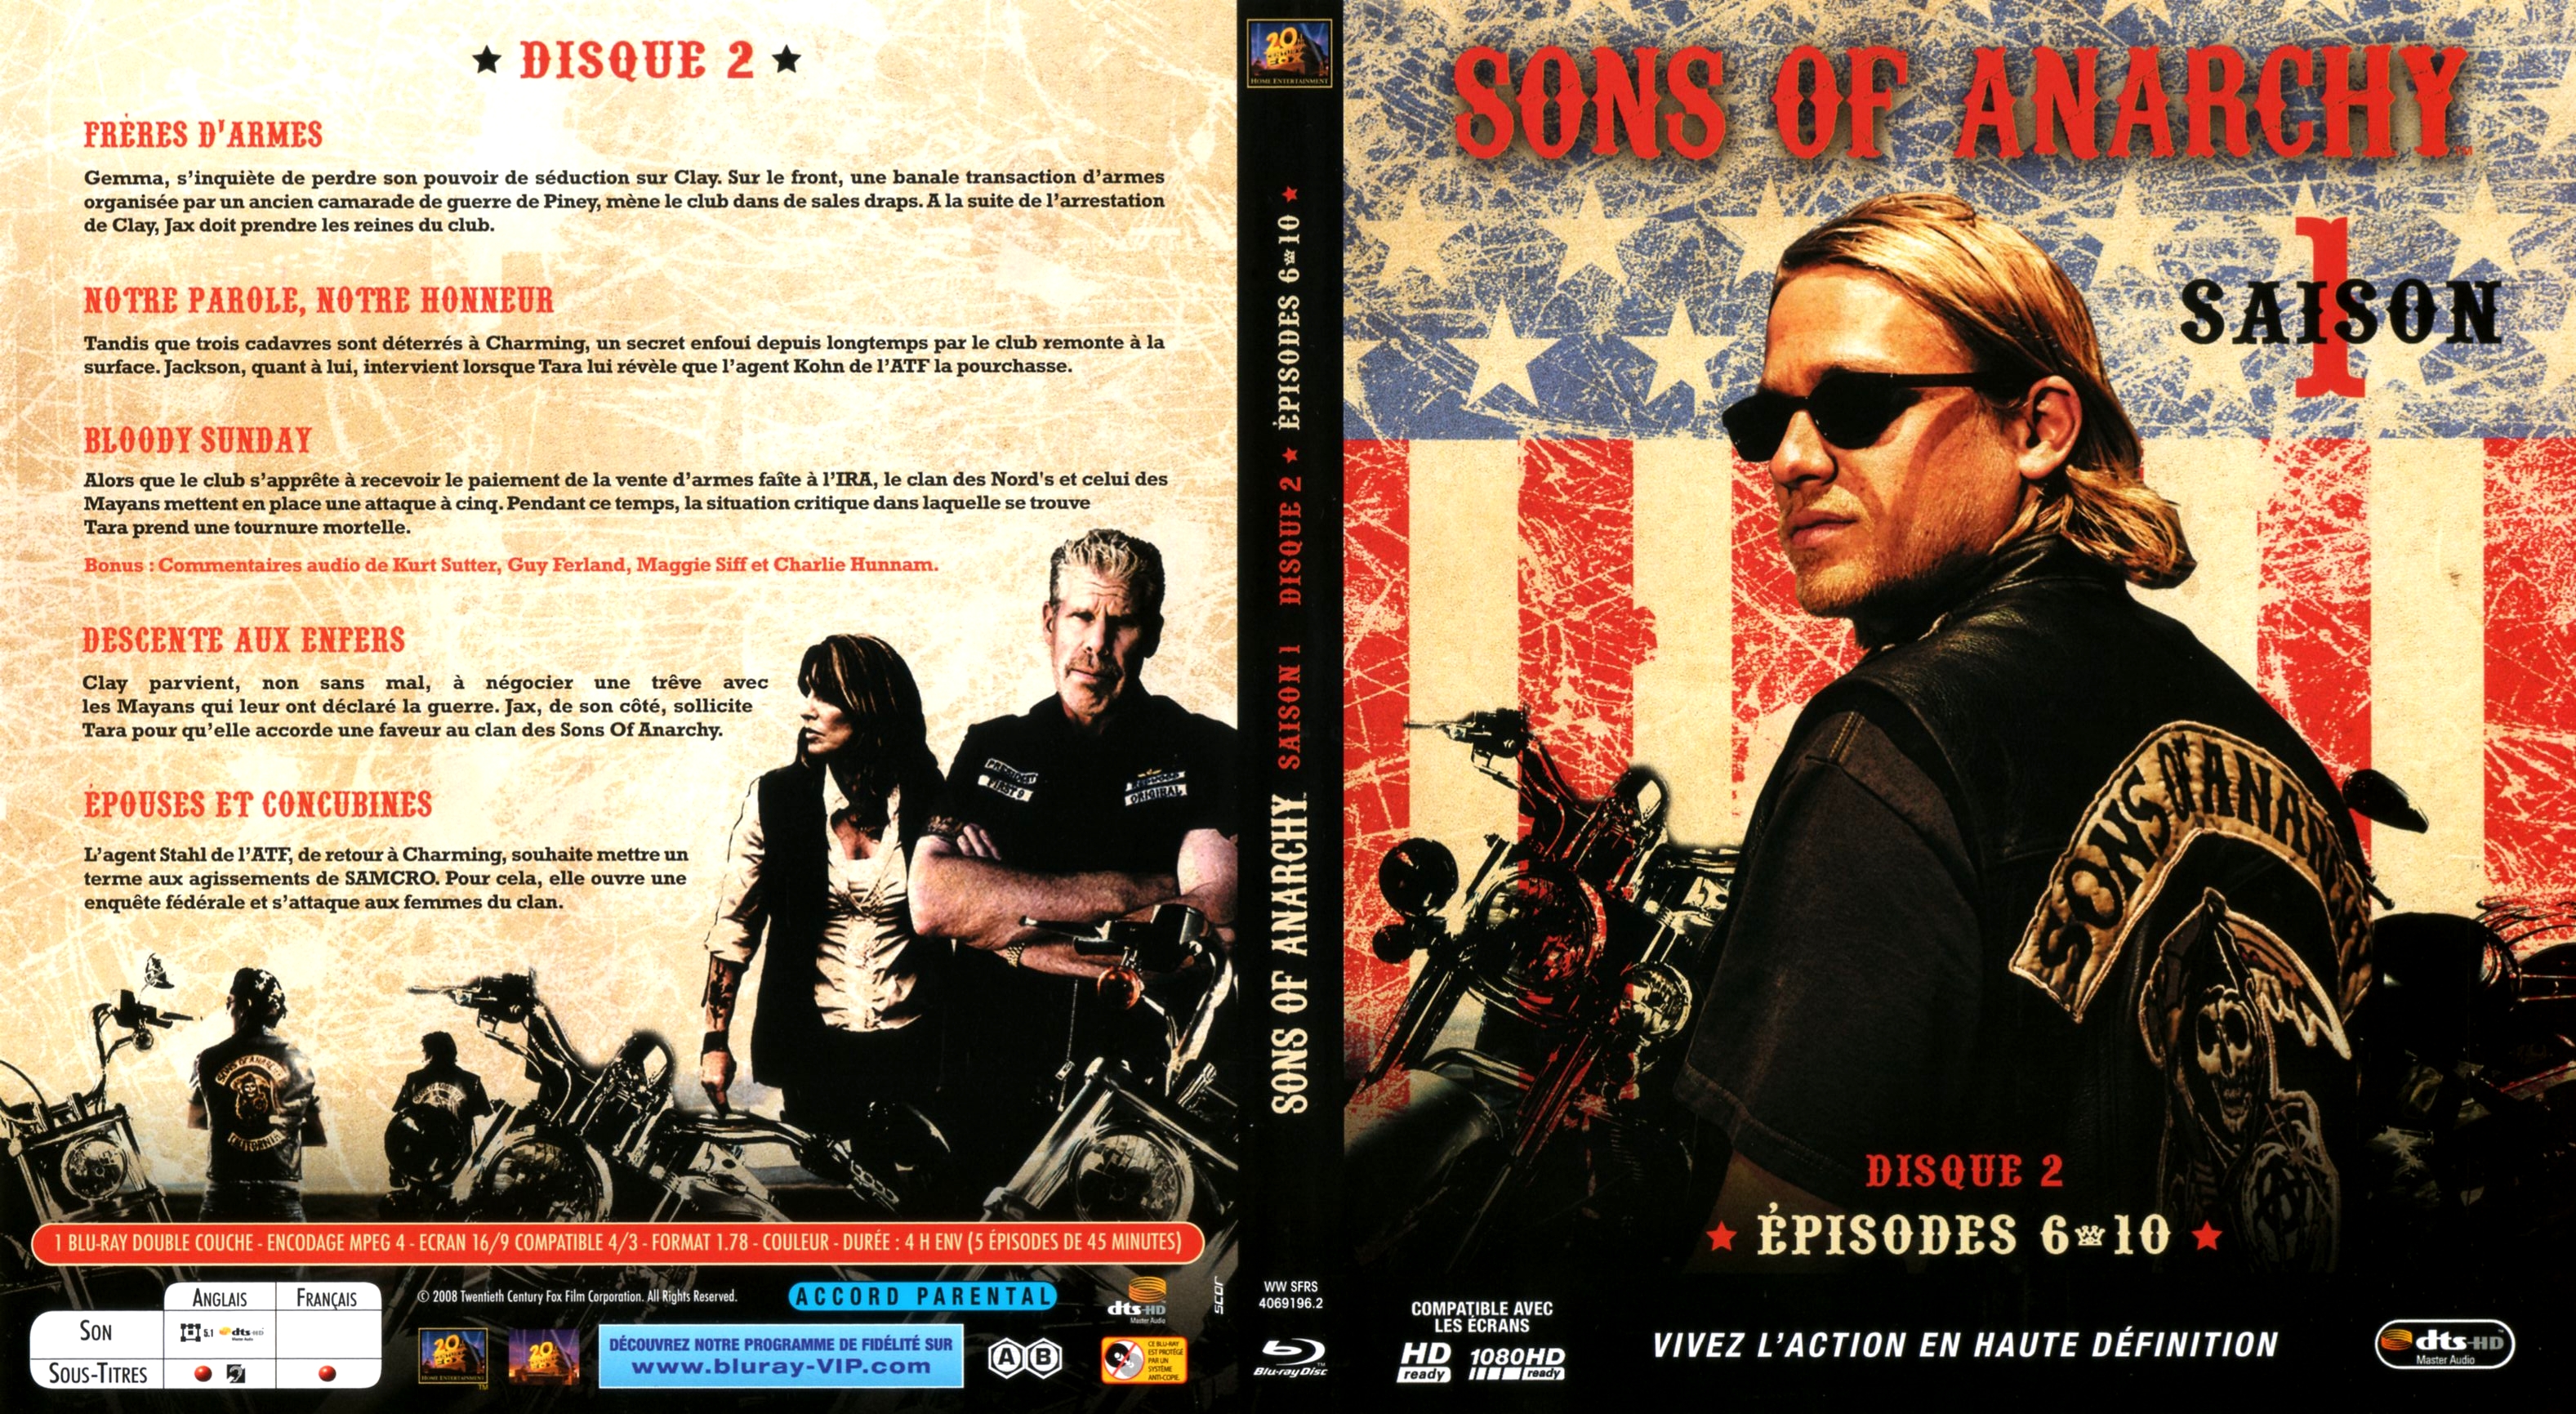 Jaquette DVD Sons of anarchy Saison 1 DISC 2 (BLU-RAY)